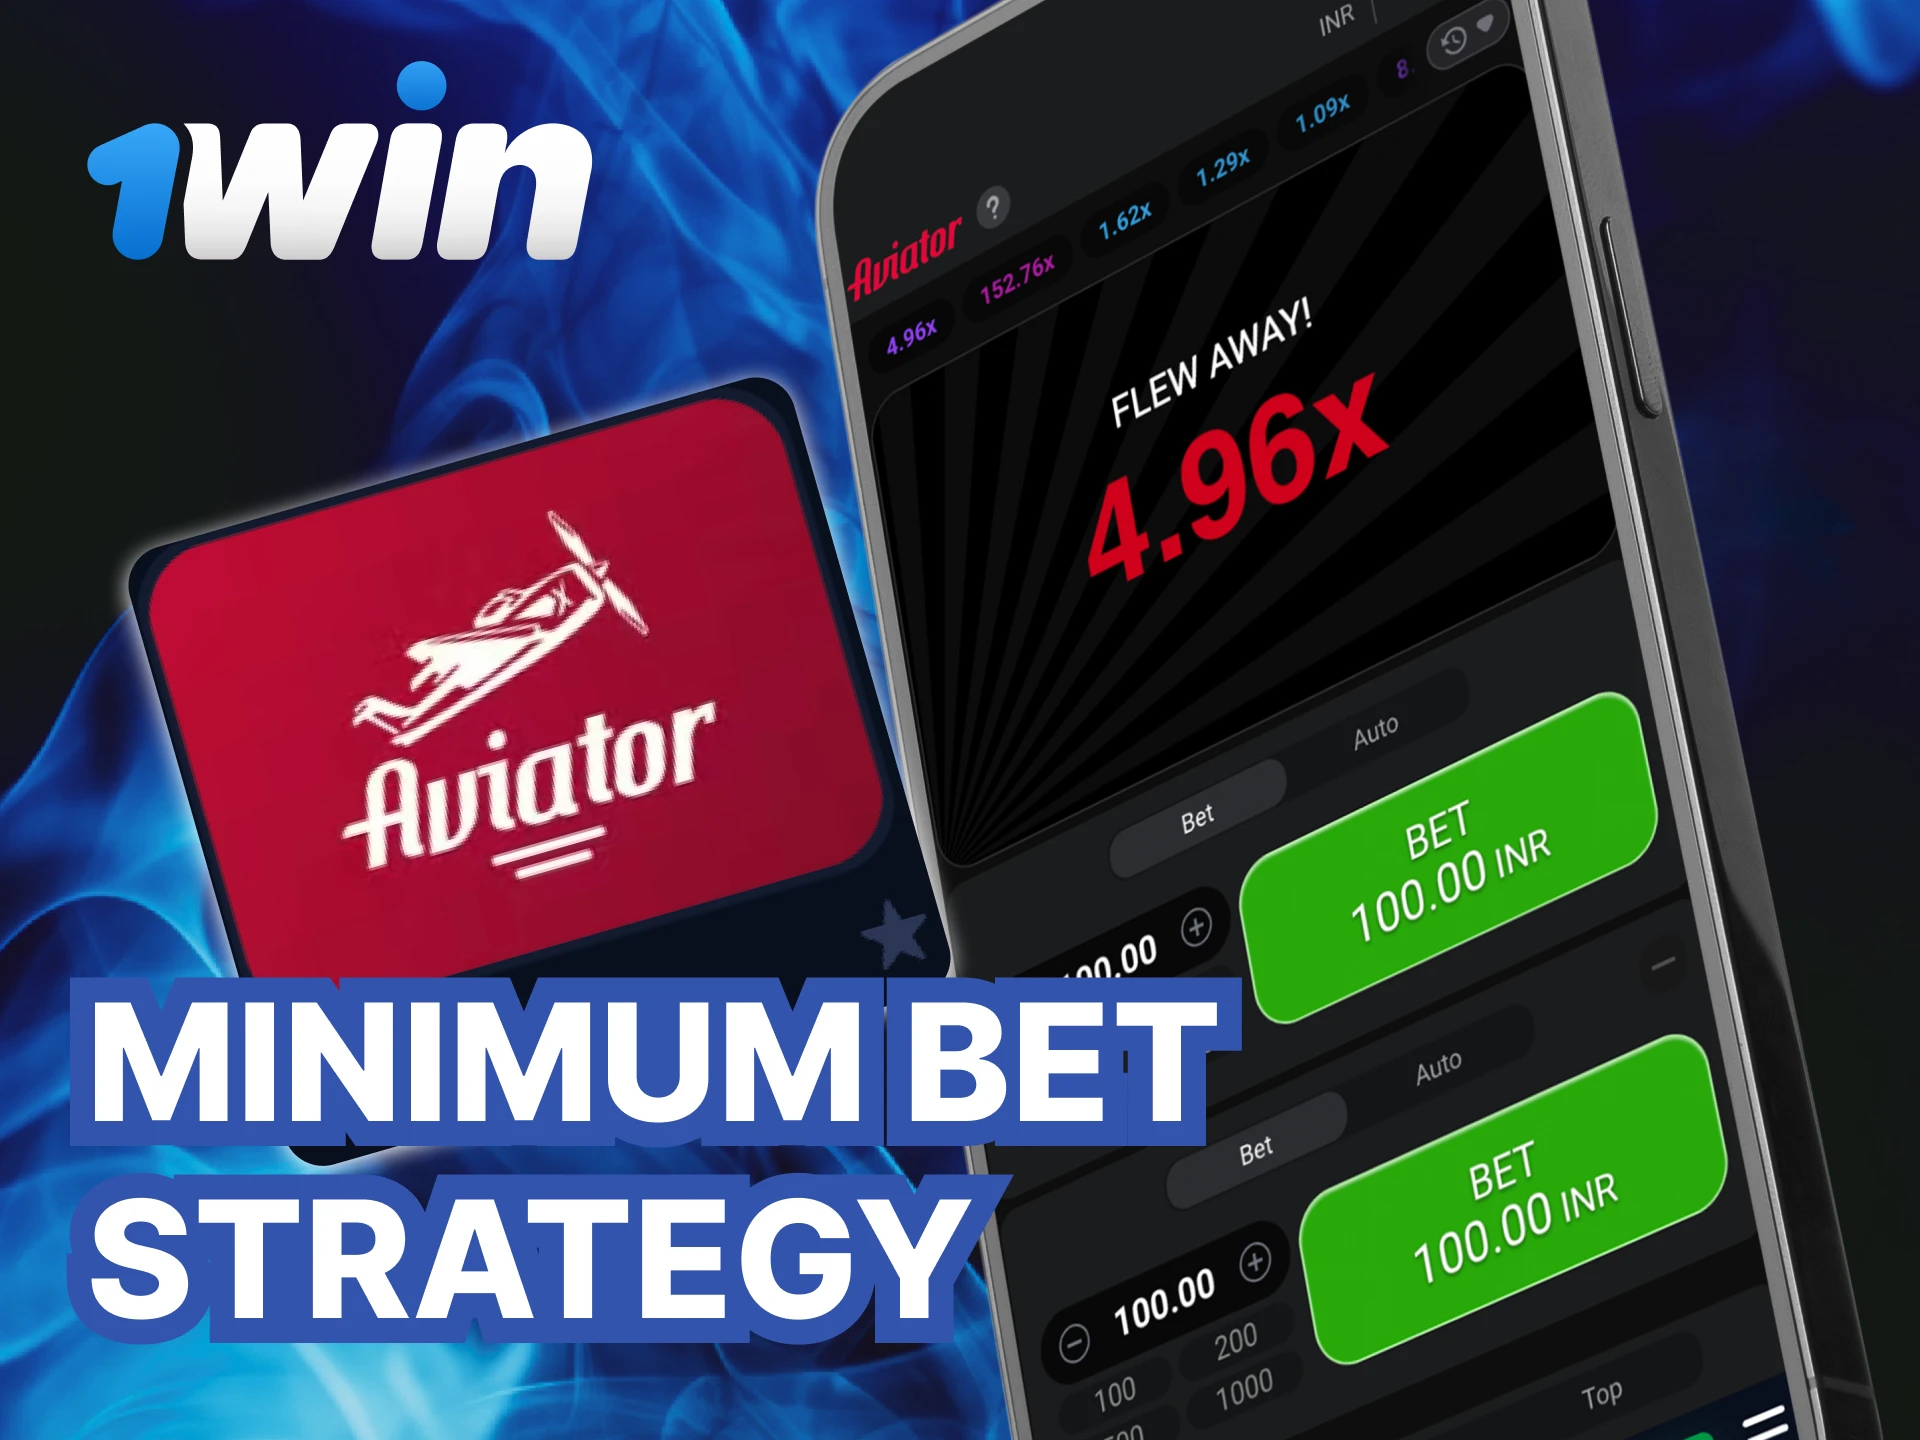 What is Minimum Bet Strategy for the Aviator game at 1Win casino.